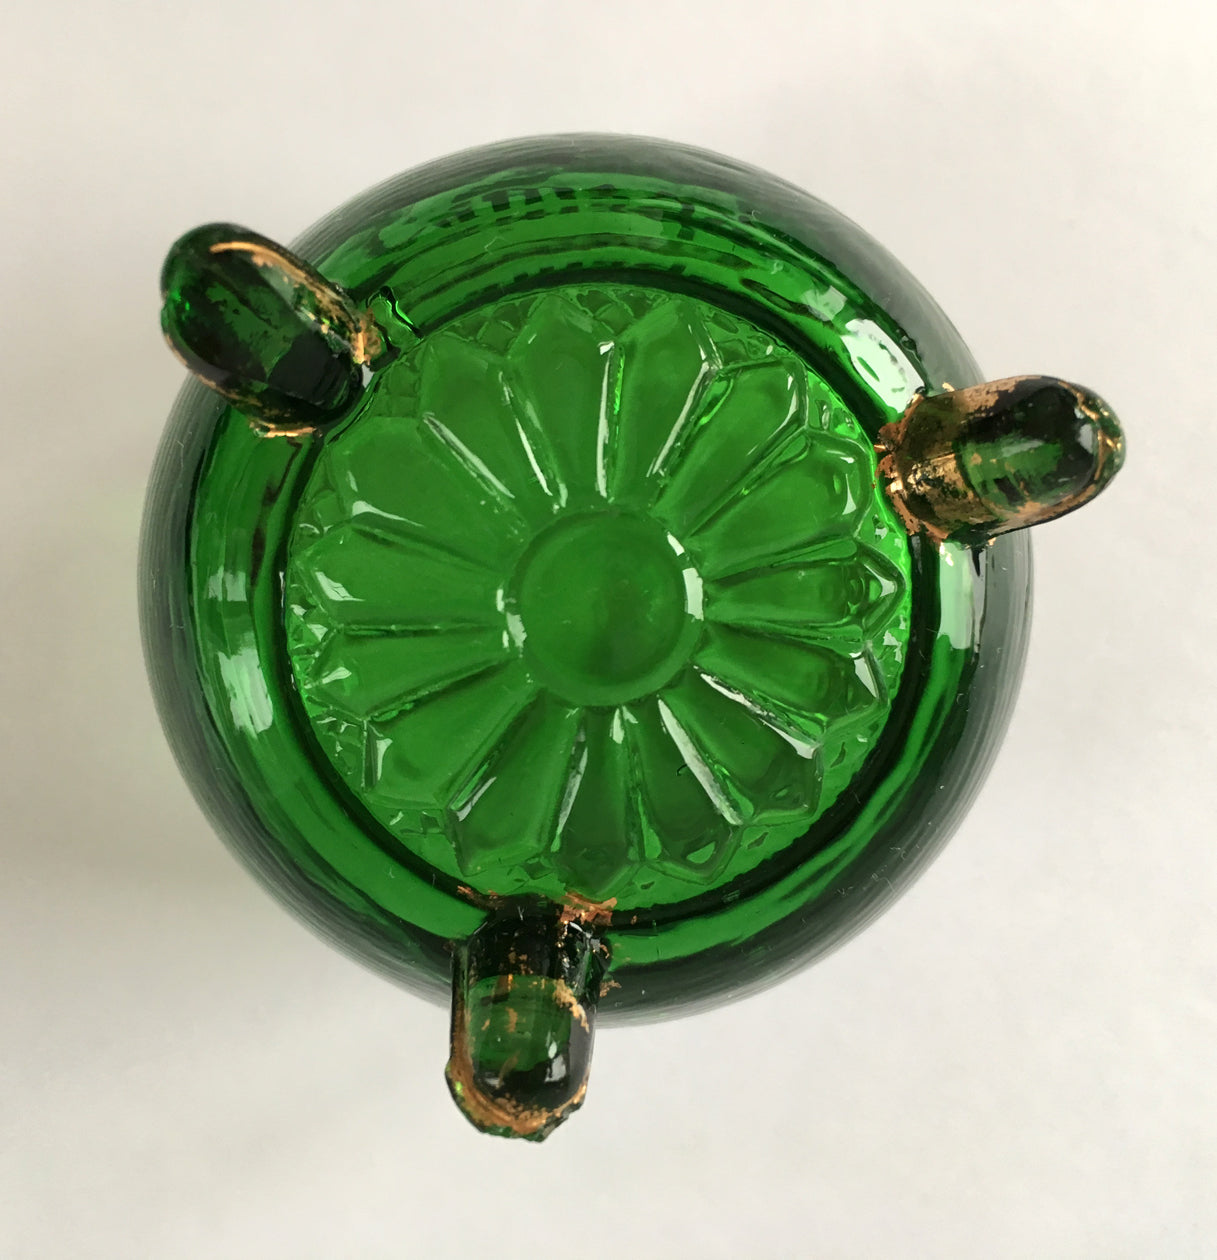 EAPG Witch's Kettle Green Glass Souvenir Toothpick Holder bottom view